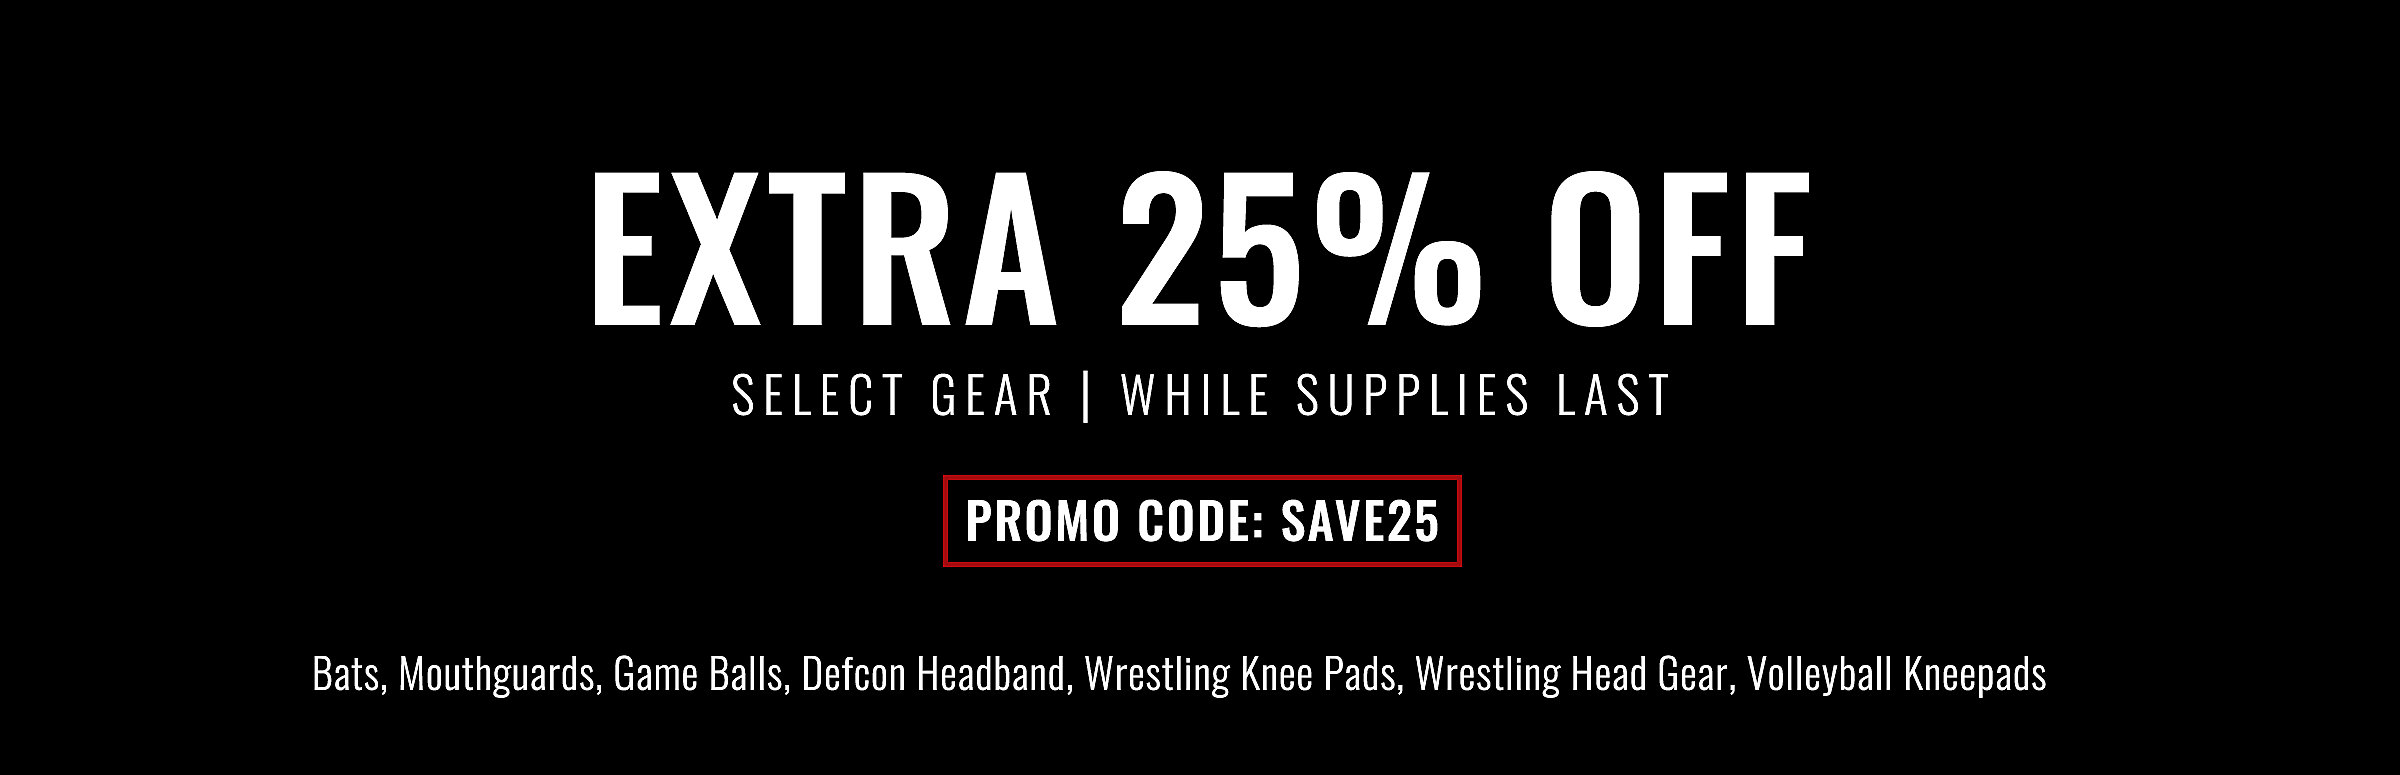 25 percent off select equiptment